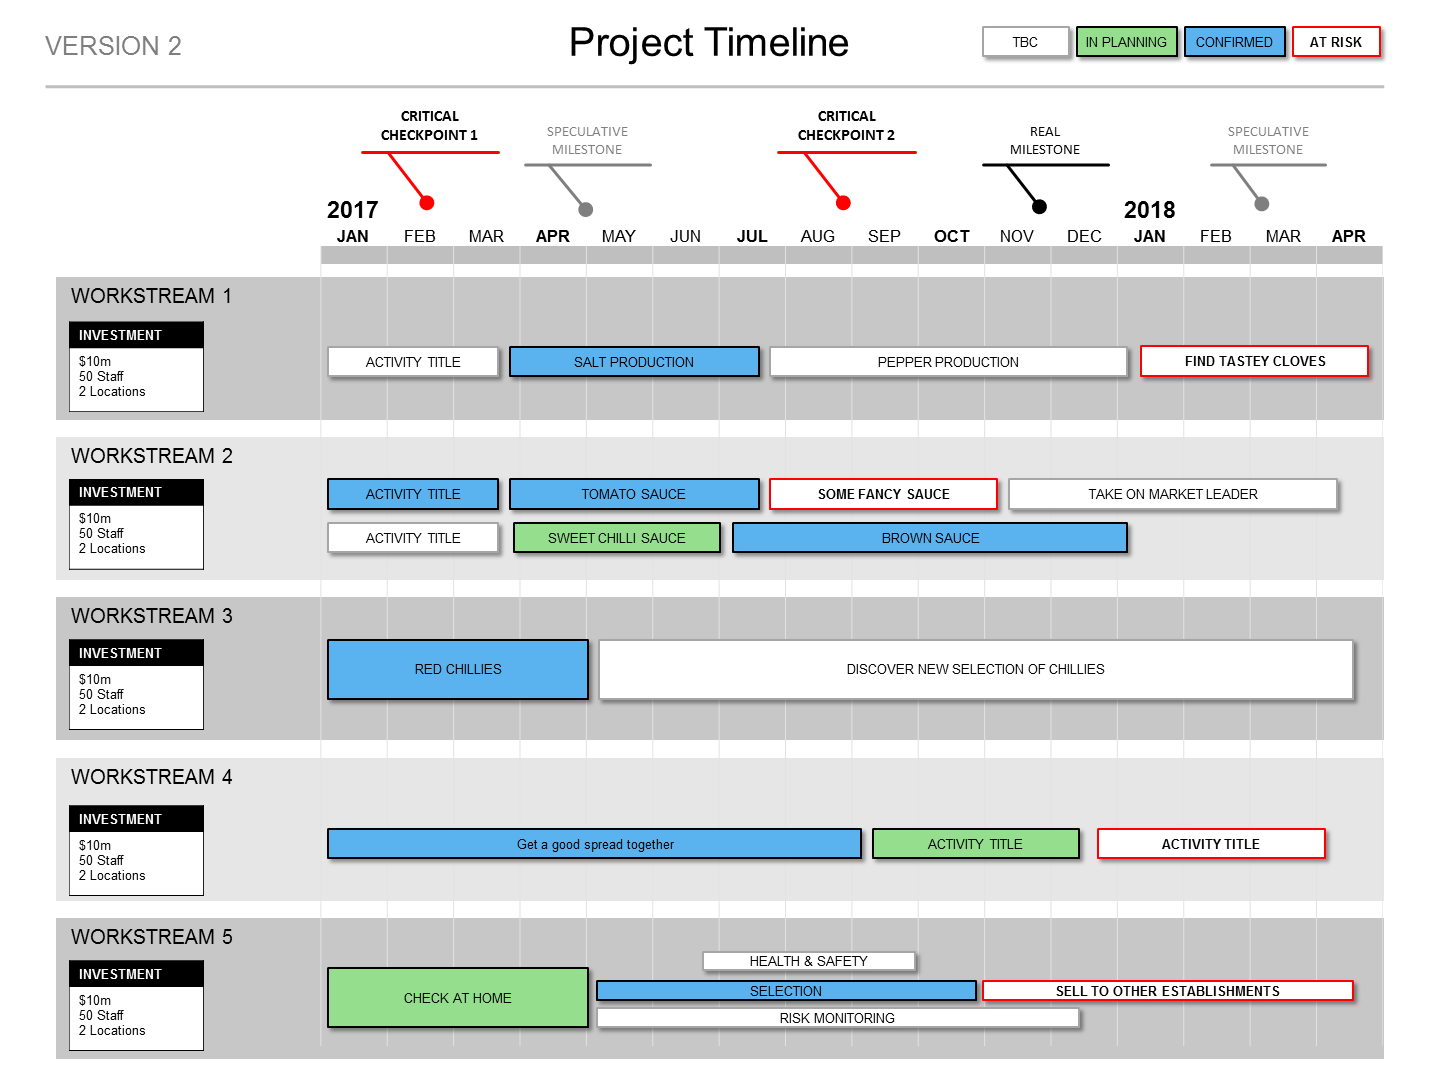 How Do I Present A Project Timeline